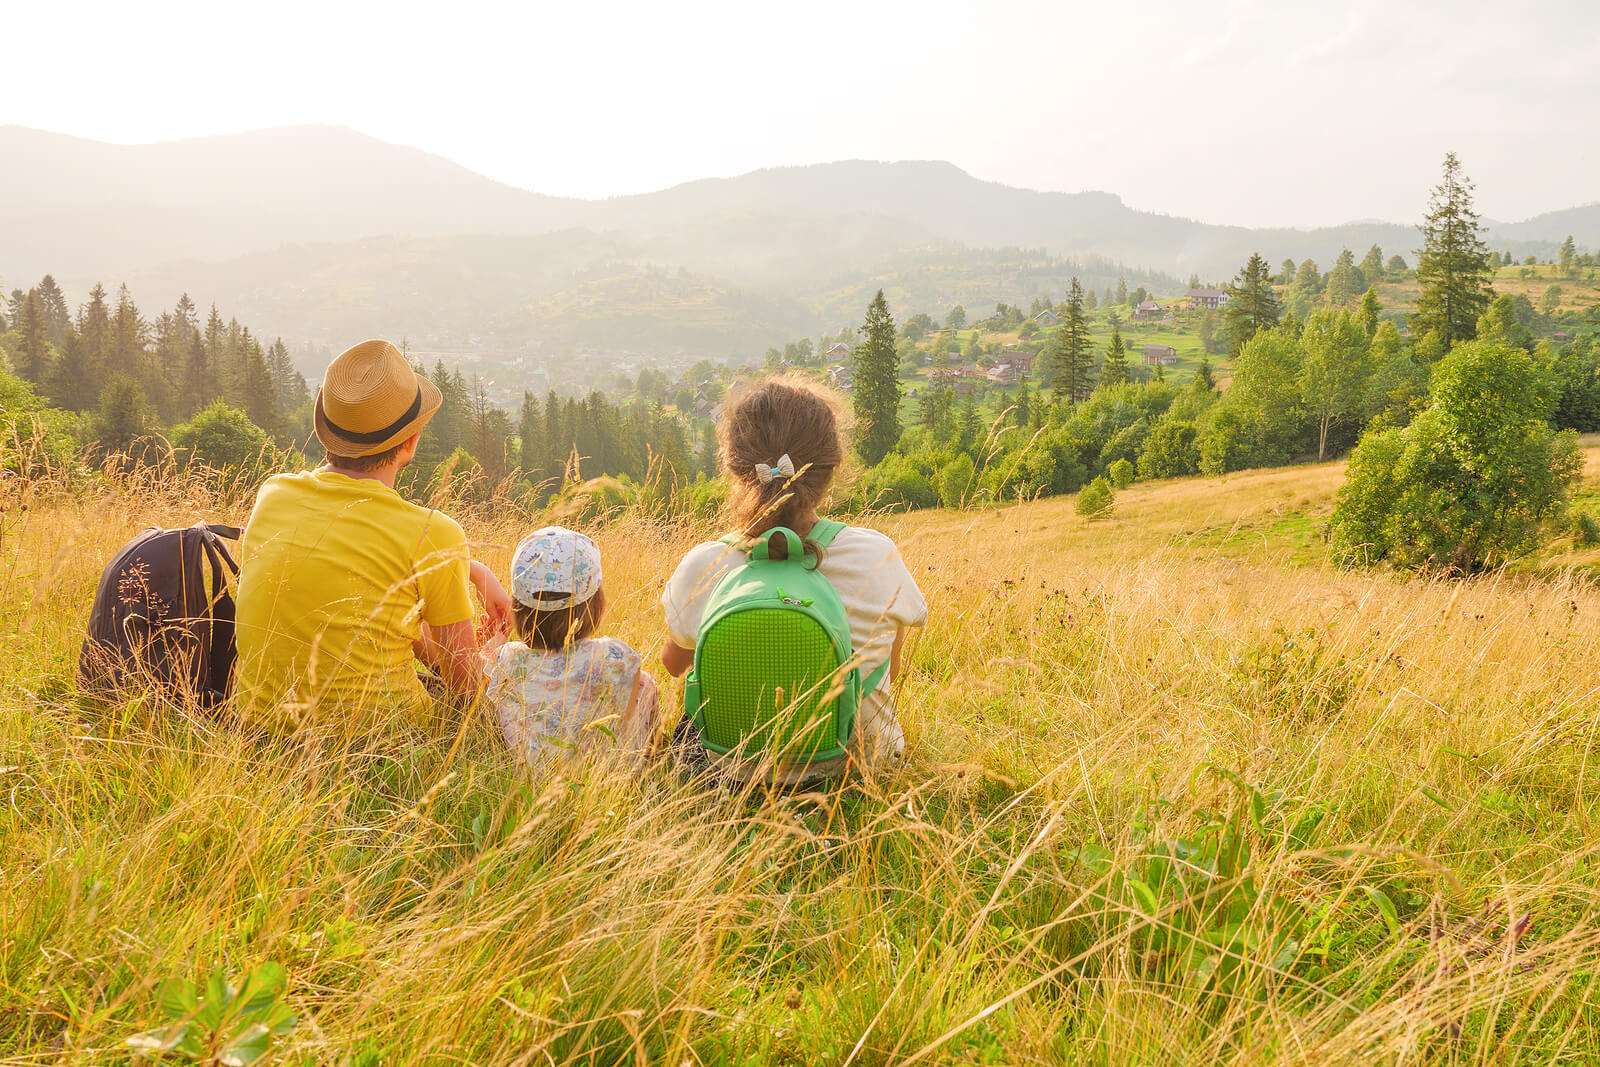 Image of a family sitting on a grassy hill looking out over a valley. Uncover your child's strengths with the help of child neuropsych testing in Saint Petersburg, FL.